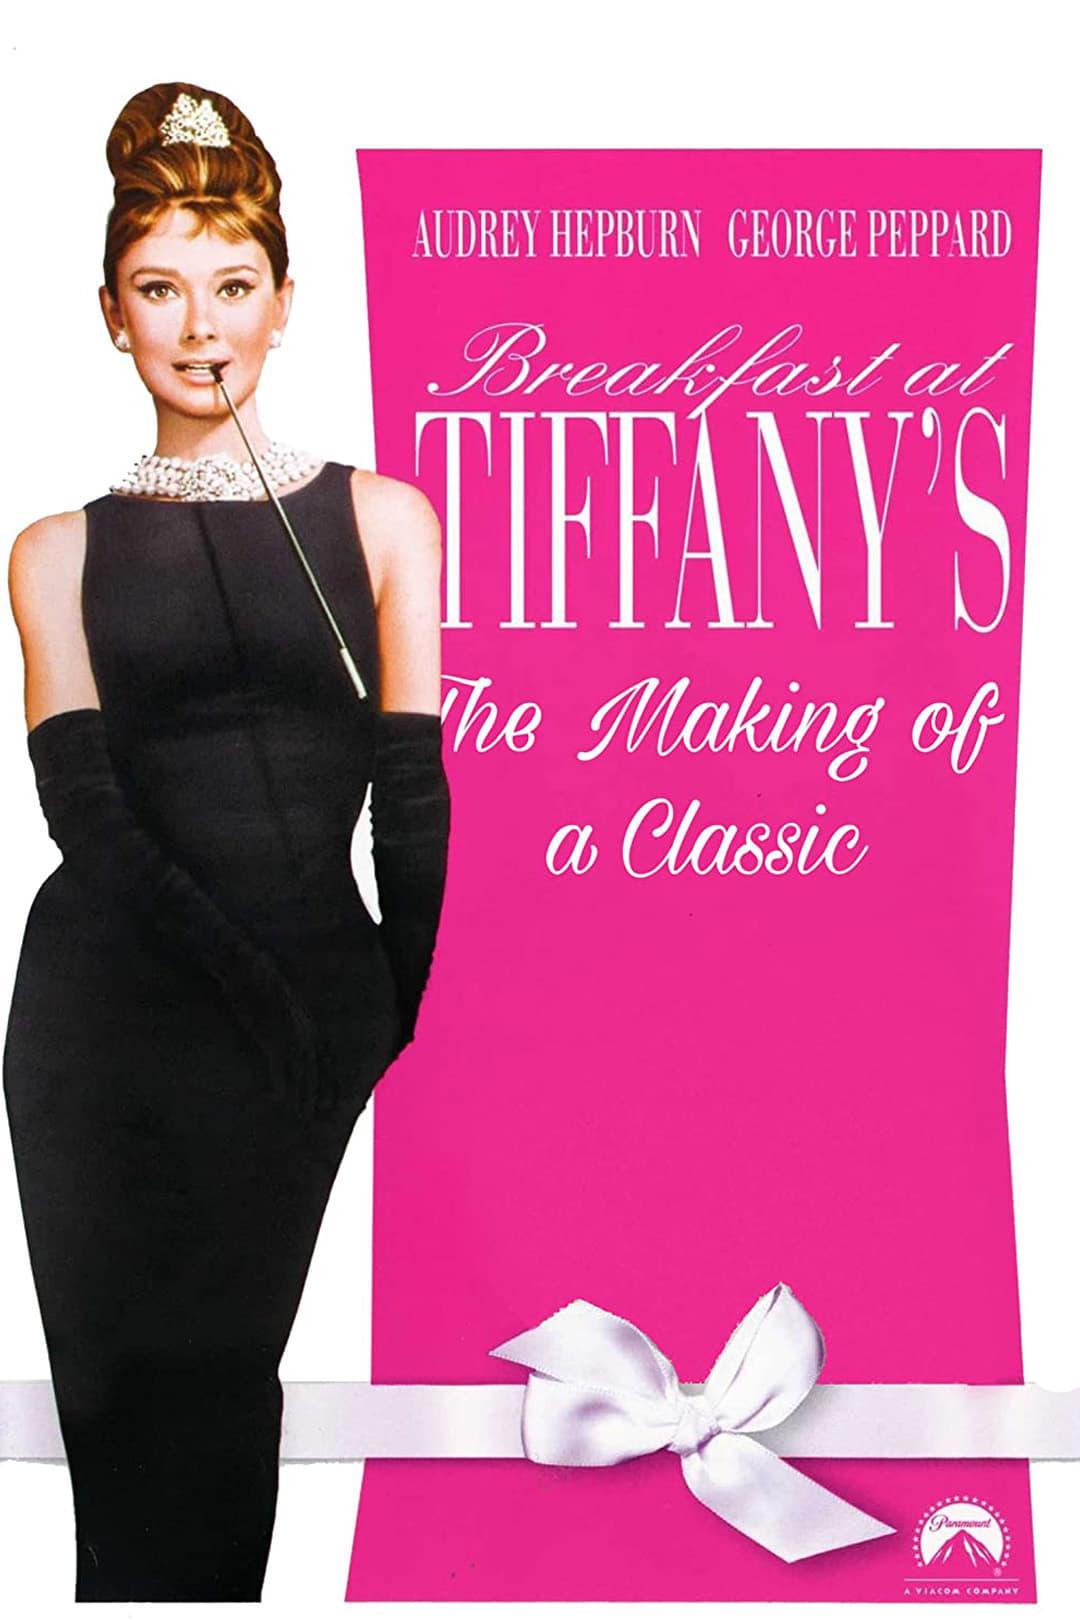 Breakfast at Tiffany's: The Making of a Classic poster